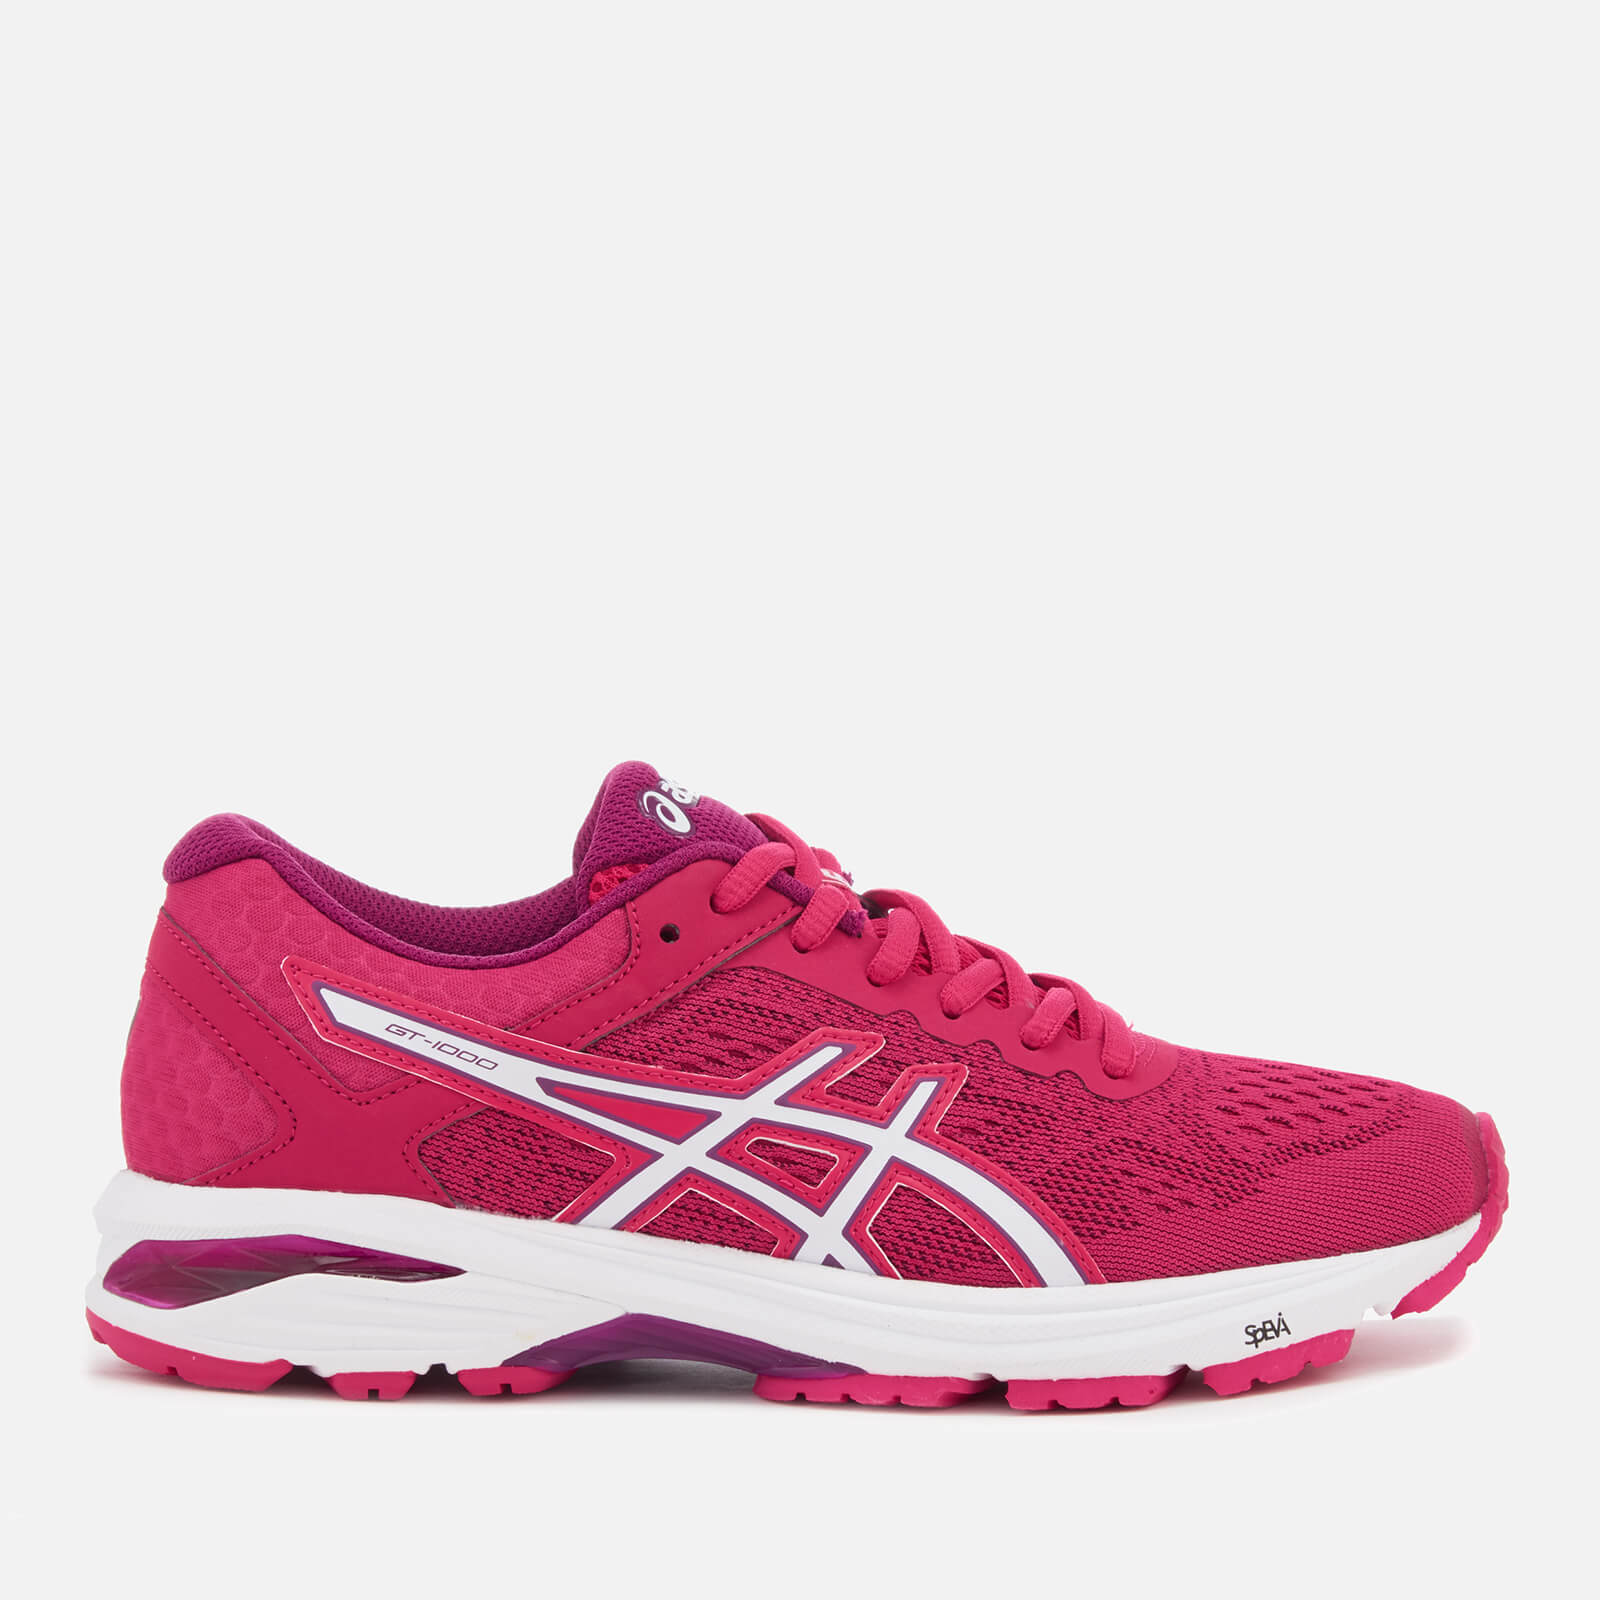 asics pink trainers cheap online